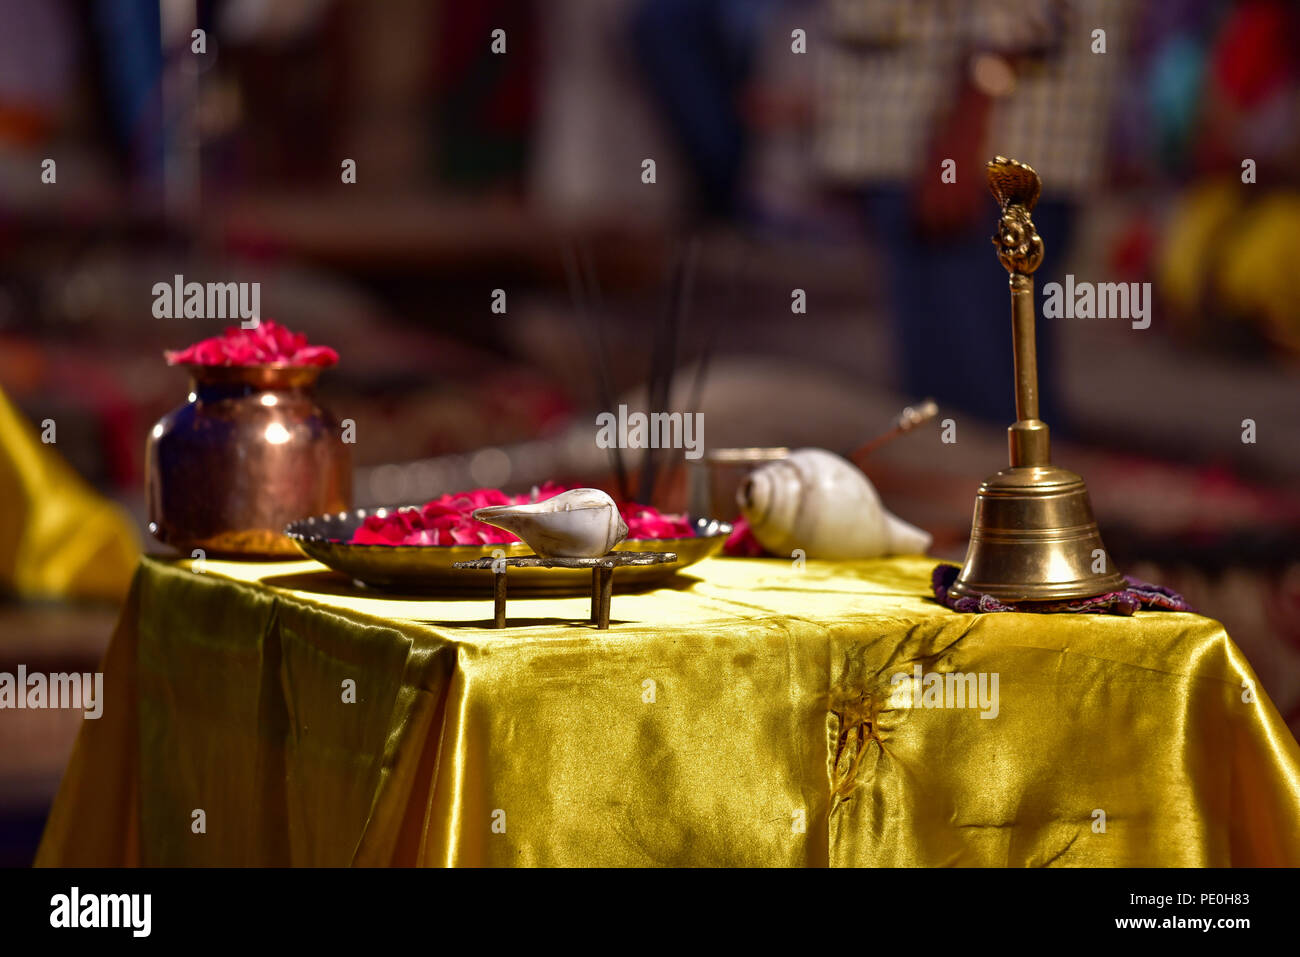 Stuff for evening Ganga Aarti ceremony at Dashashwamedh ghat by Ganges river Stock Photo